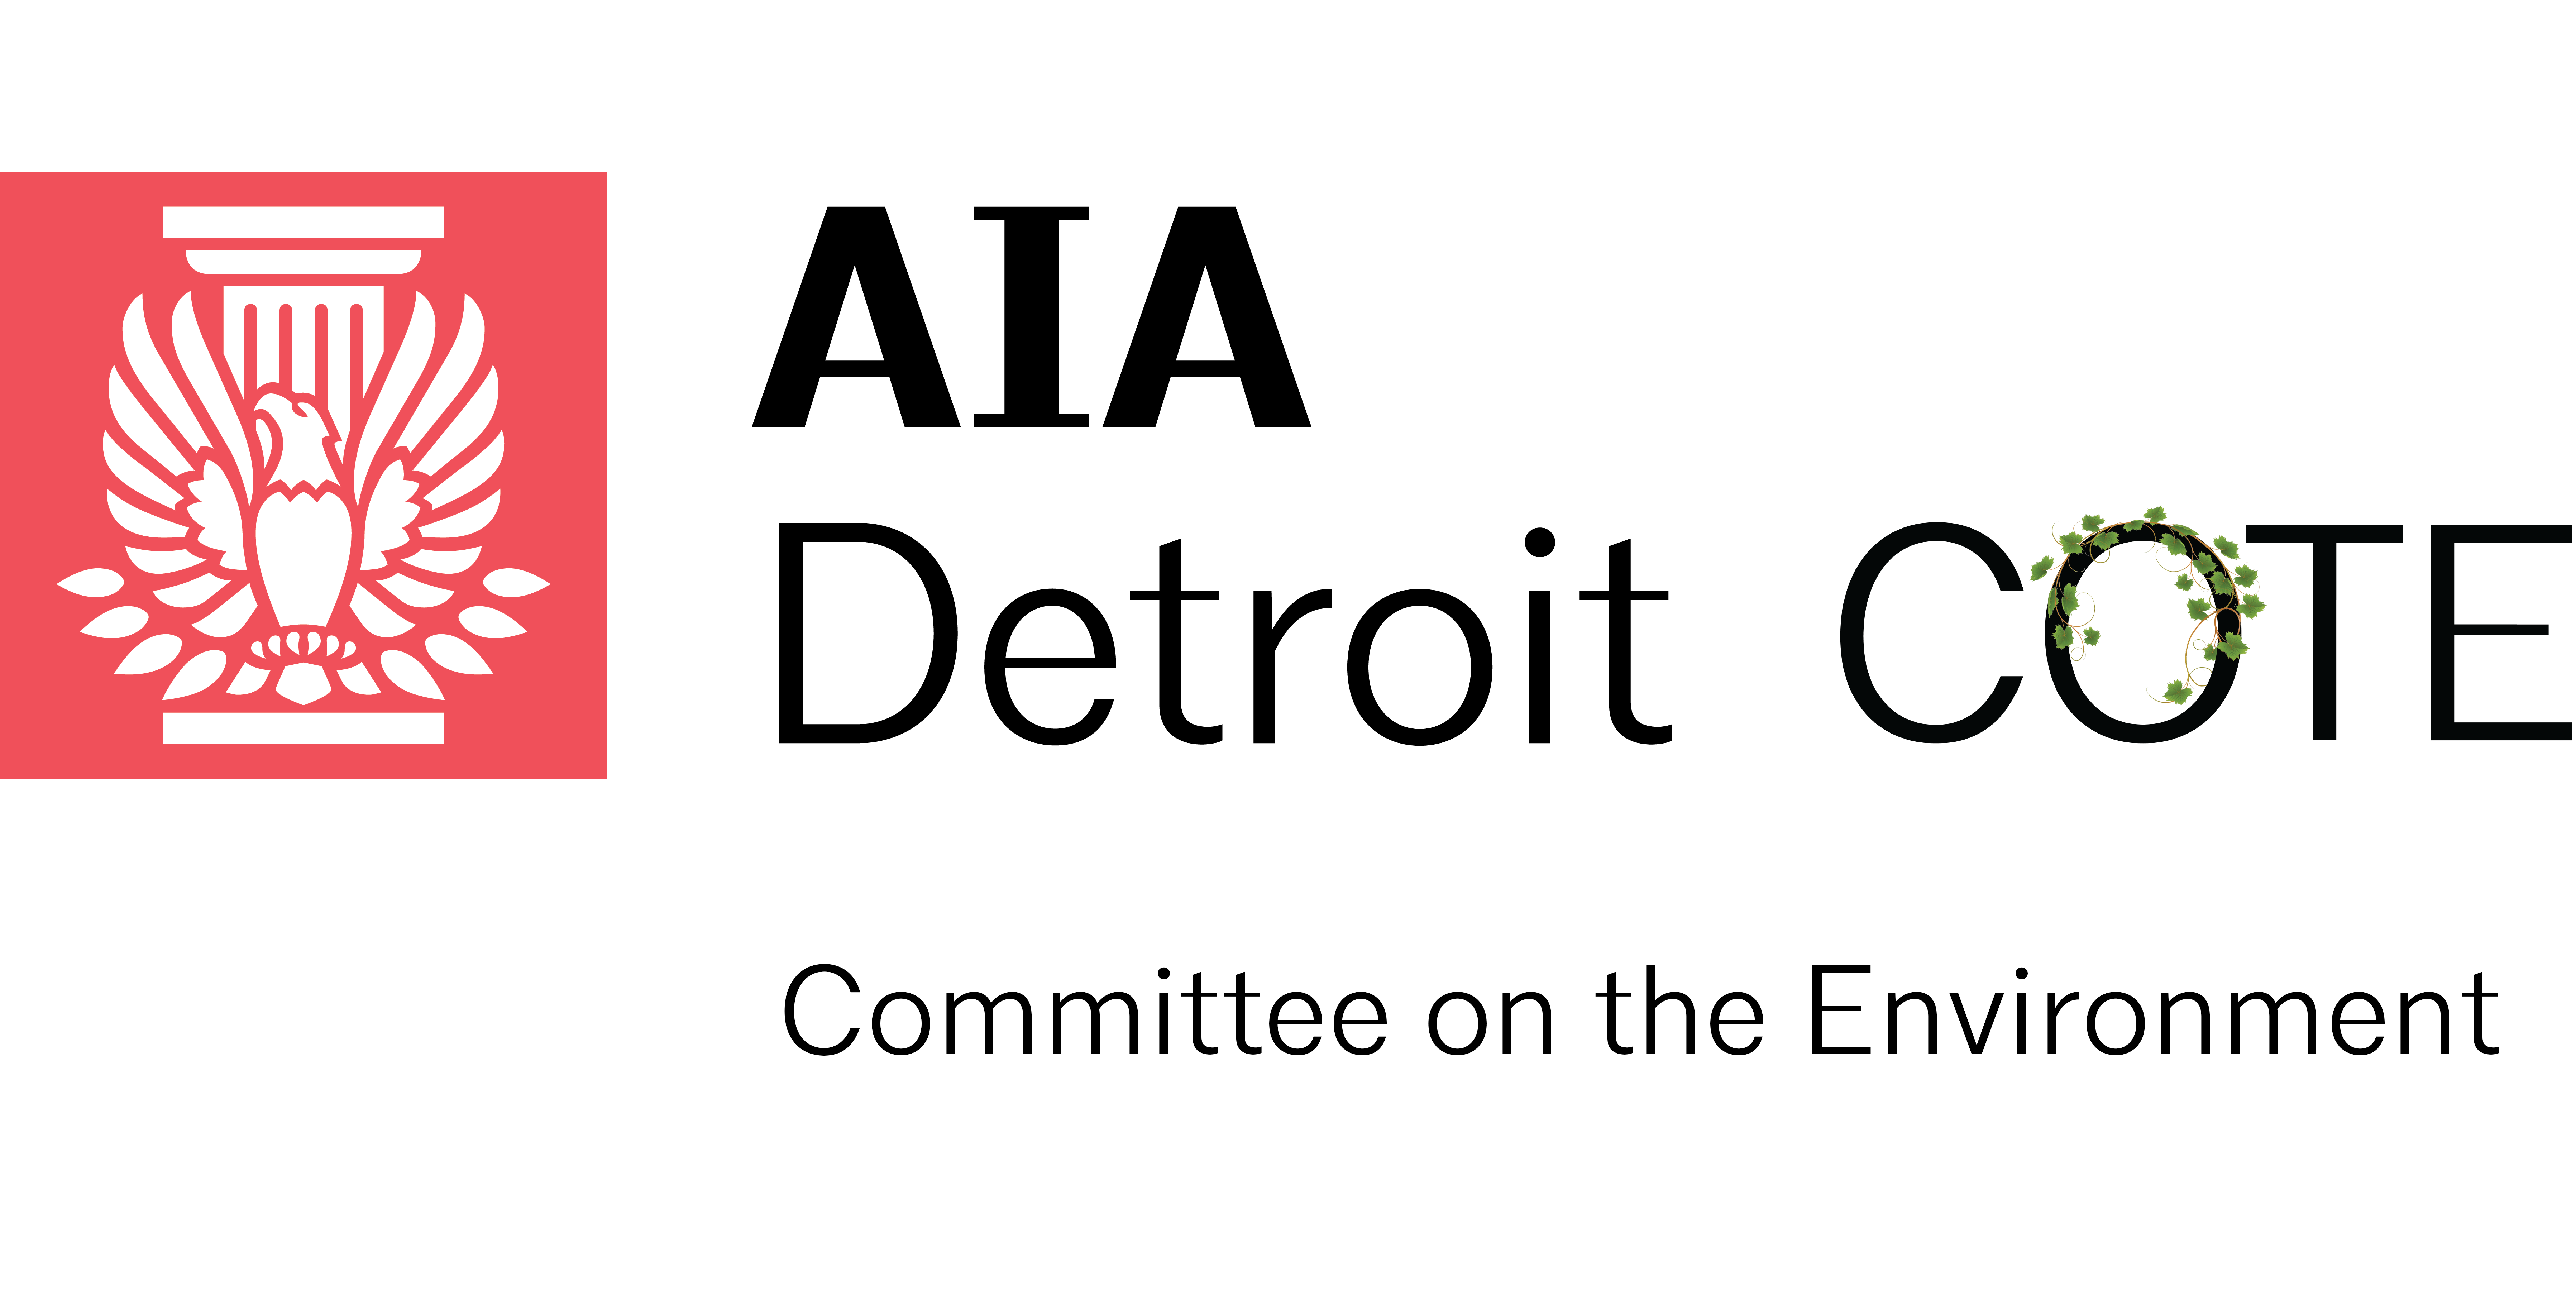 AIA Detroit Committee on the Environment February 2018 Meeting